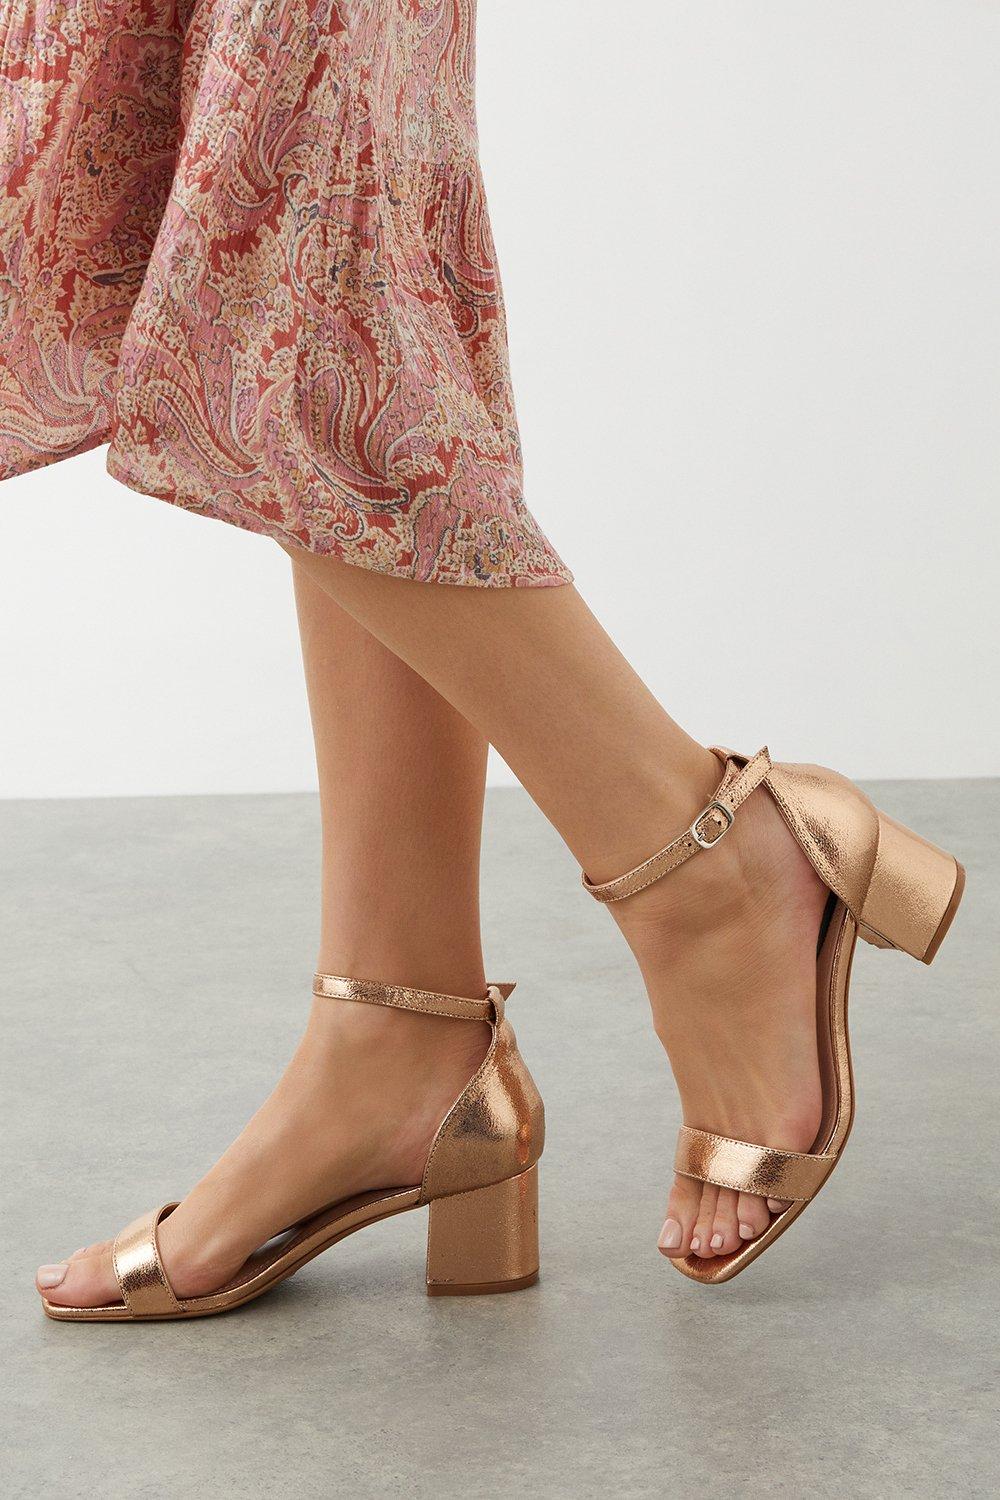 Women’s Sammy Low Block Barely There Heels - rose gold - 5